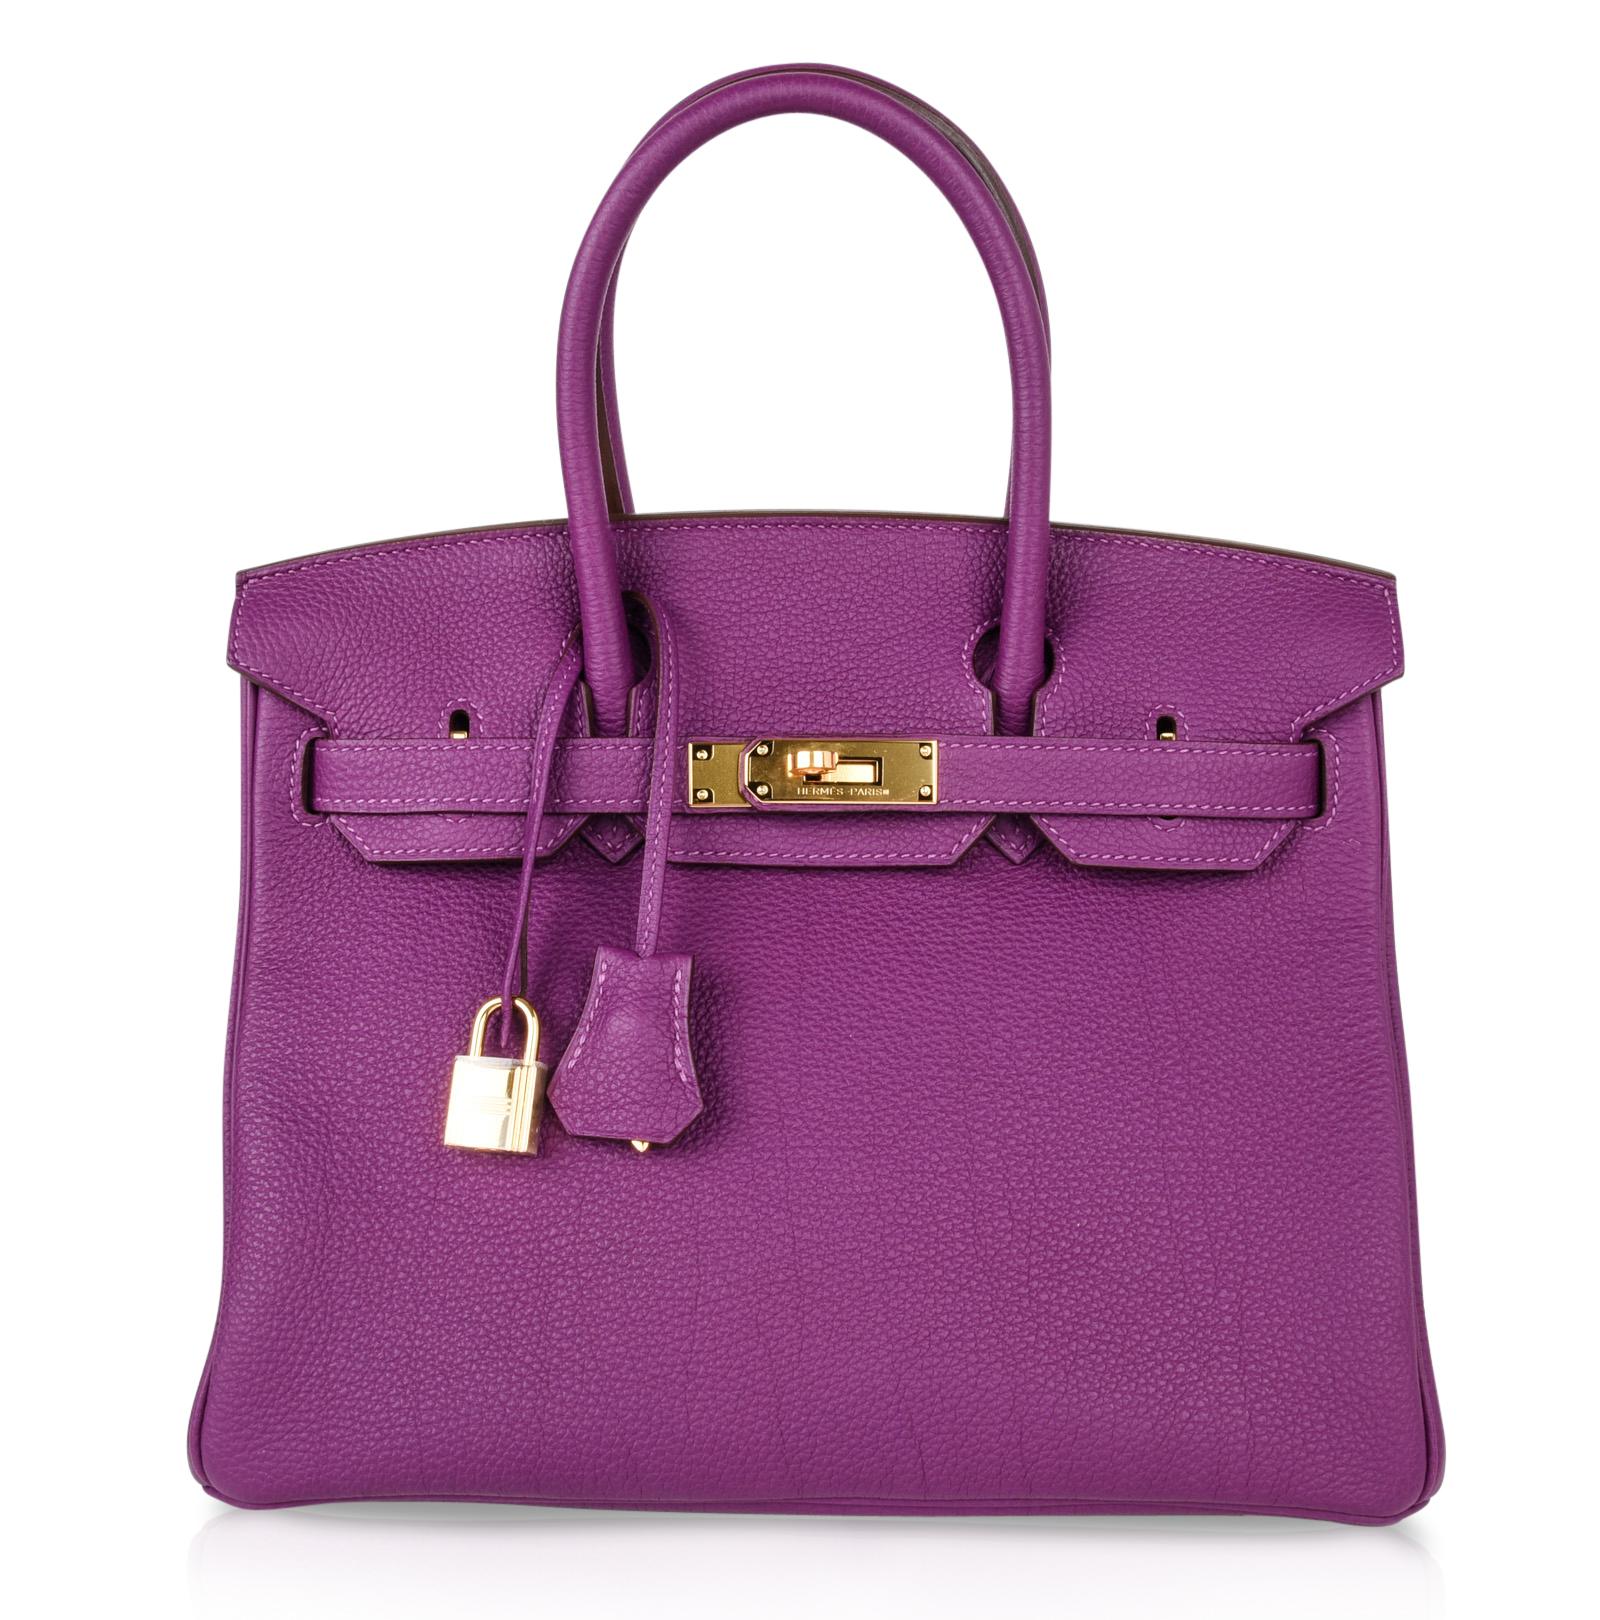 Guaranteed authentic Hermes Birkin 30 luxurious Anemone retired colour purple.
Togo leather with gold hardware.
This exquisite pre owned bag has immaculate corners, body, handles and interior.
Brand new strap gold hardware.   Lock is still in